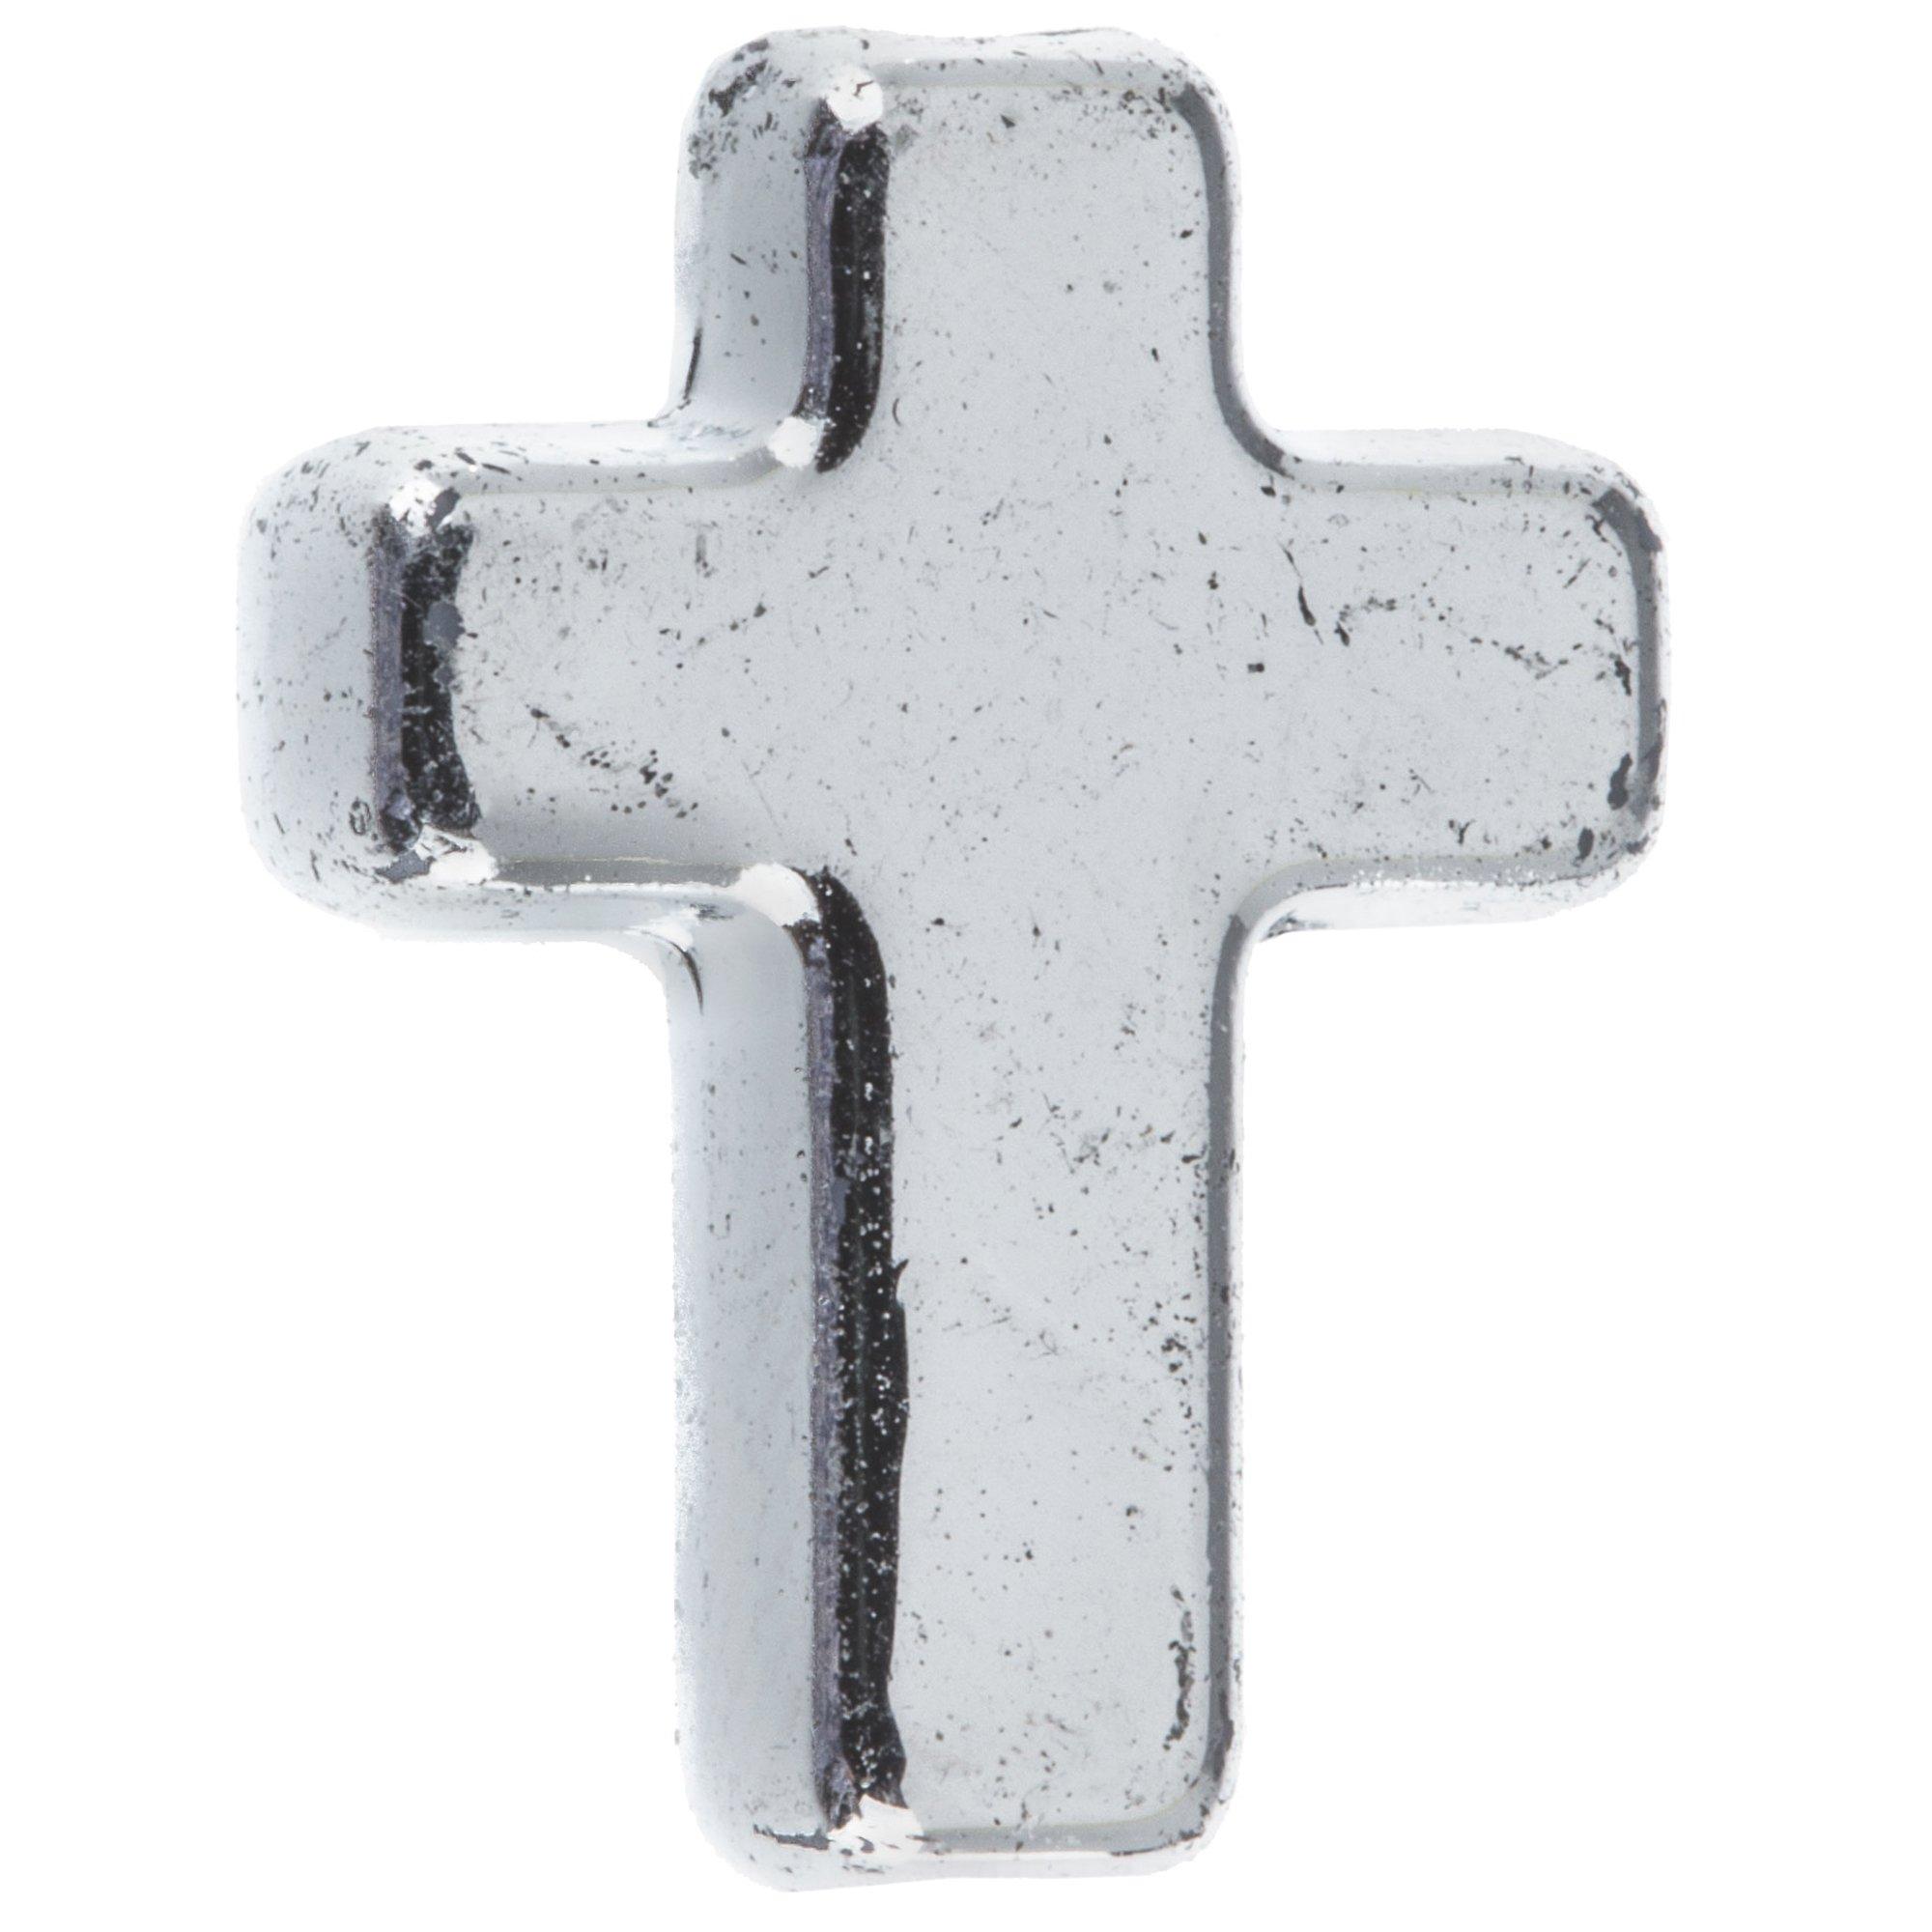 Cross Metal Beads Antique Silver, Pack of 10/20 Beads, 8mm Cross Beads,  Jewelry Making Supplies G1648 